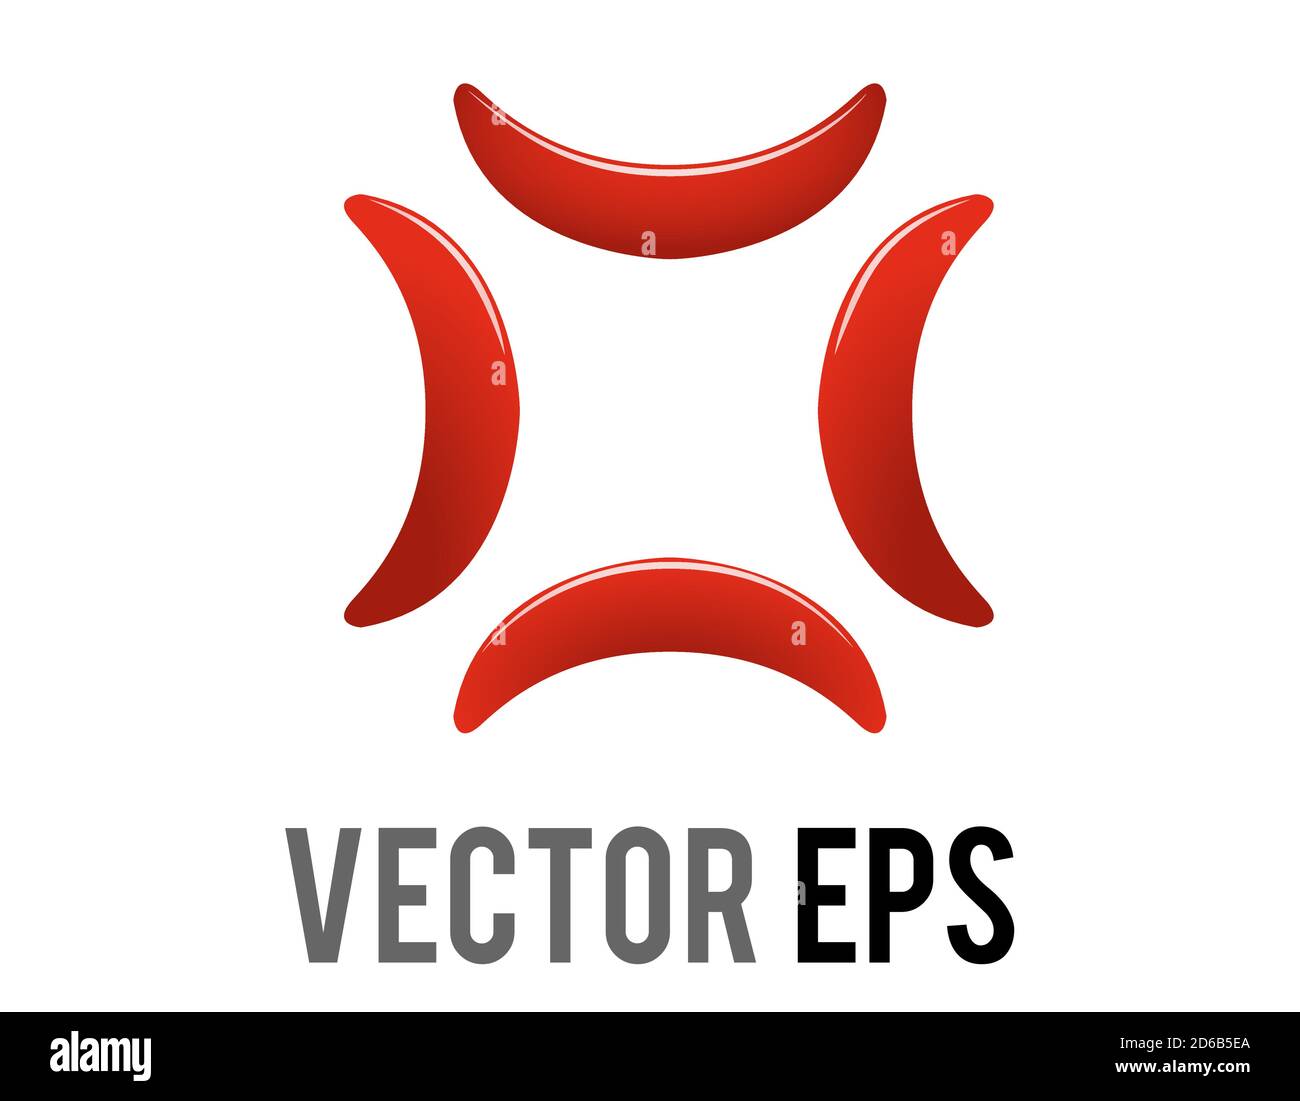 Search Results manga Vector EPS Free Download, Logo, Icons, Clipart